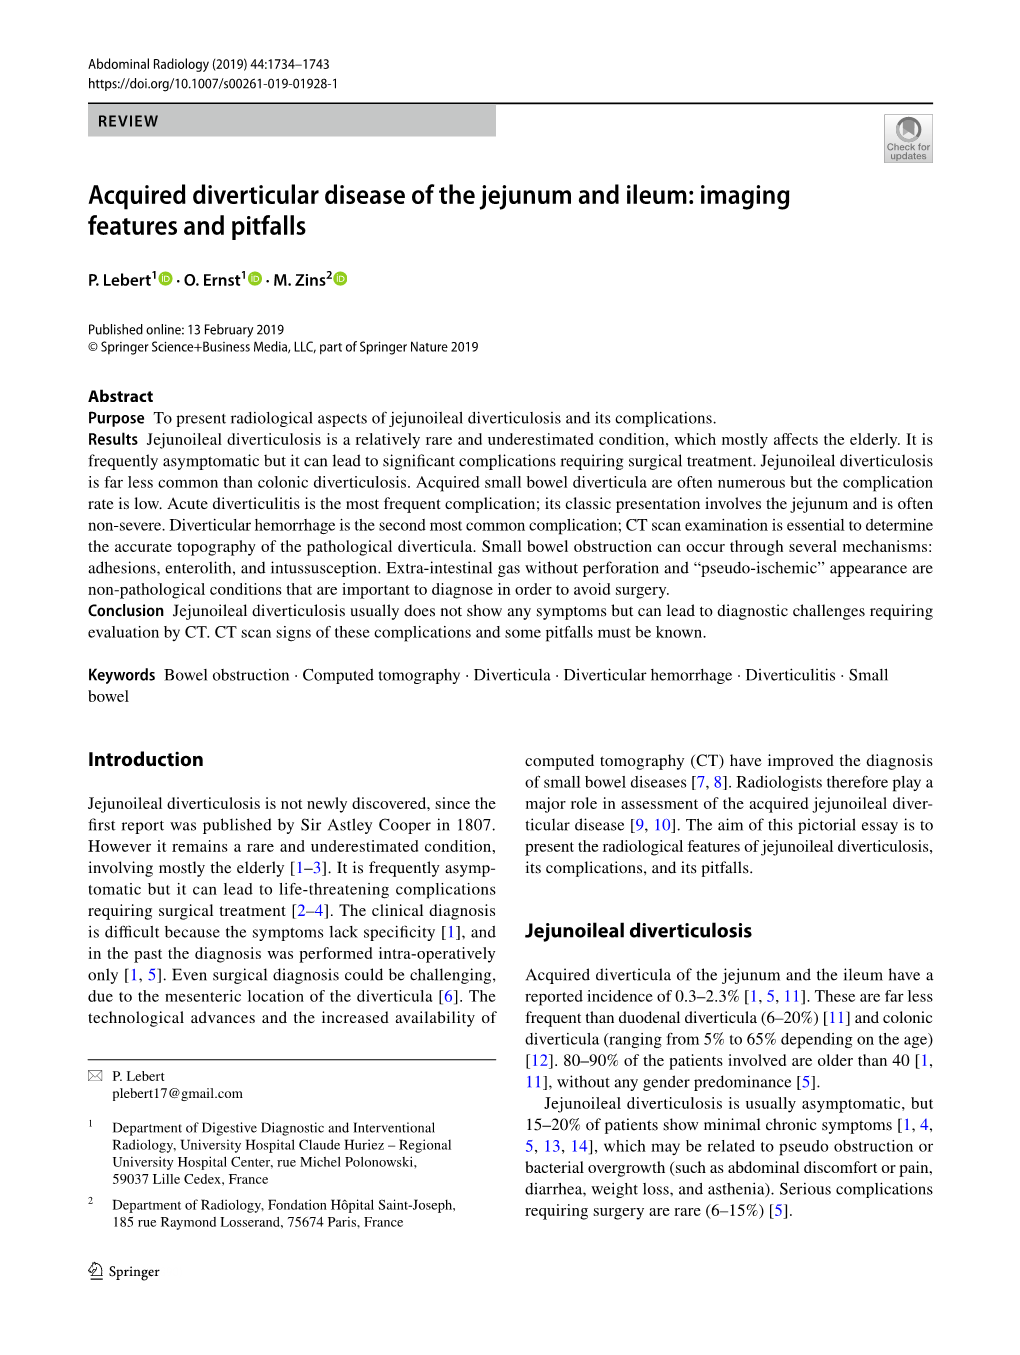 Acquired Diverticular Disease of the Jejunum and Ileum: Imaging Features and Pitfalls